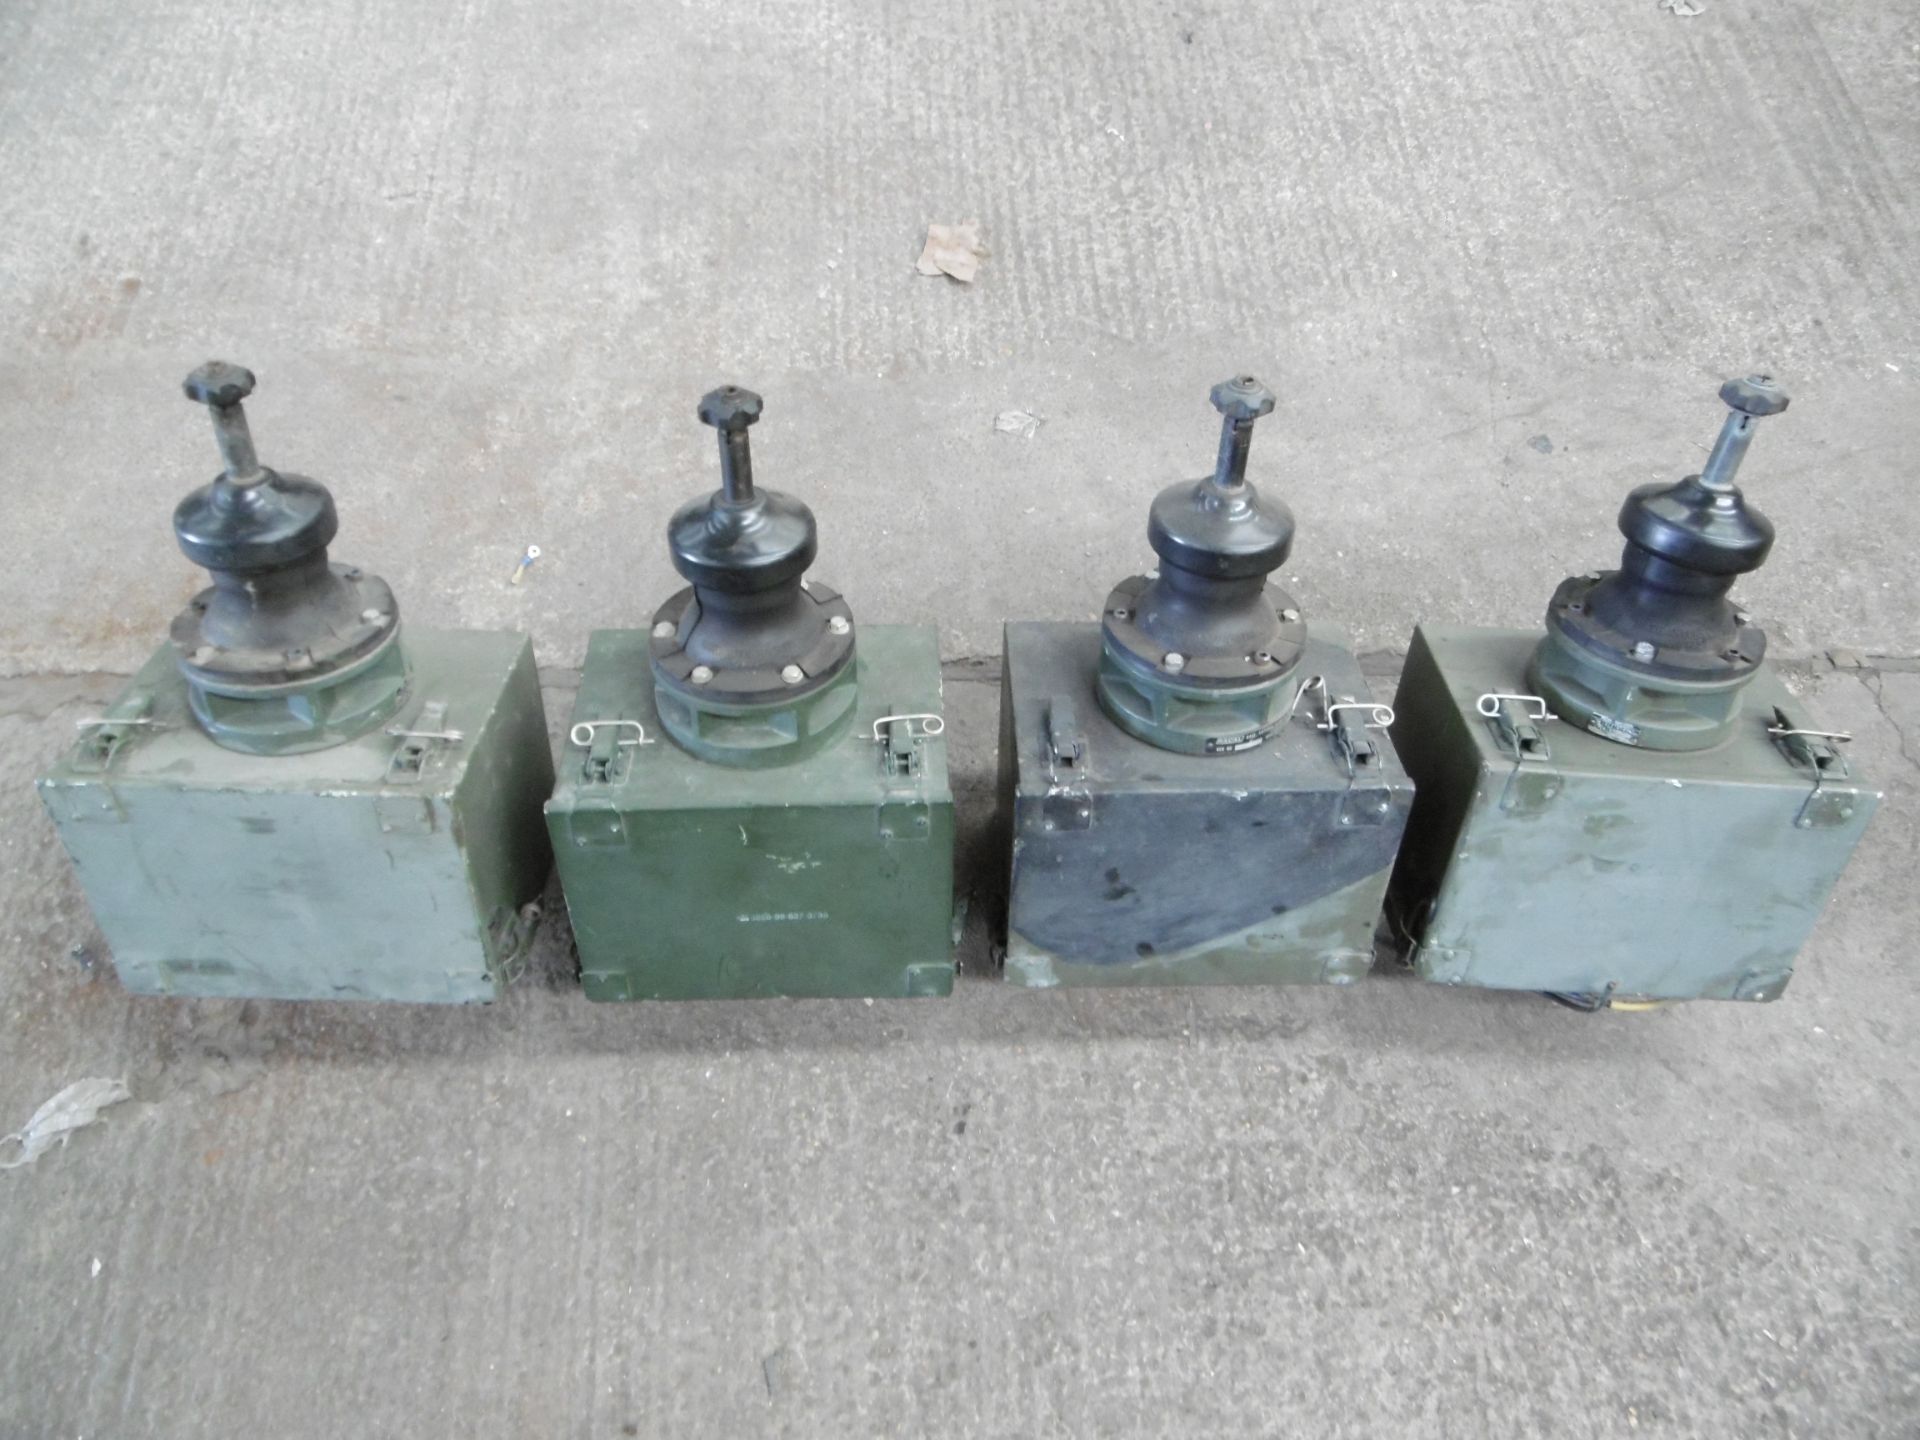 4 x Land Rover Wing Antenna Boxes ATU Boxes Complete with Aerial Bases and Tuaam's